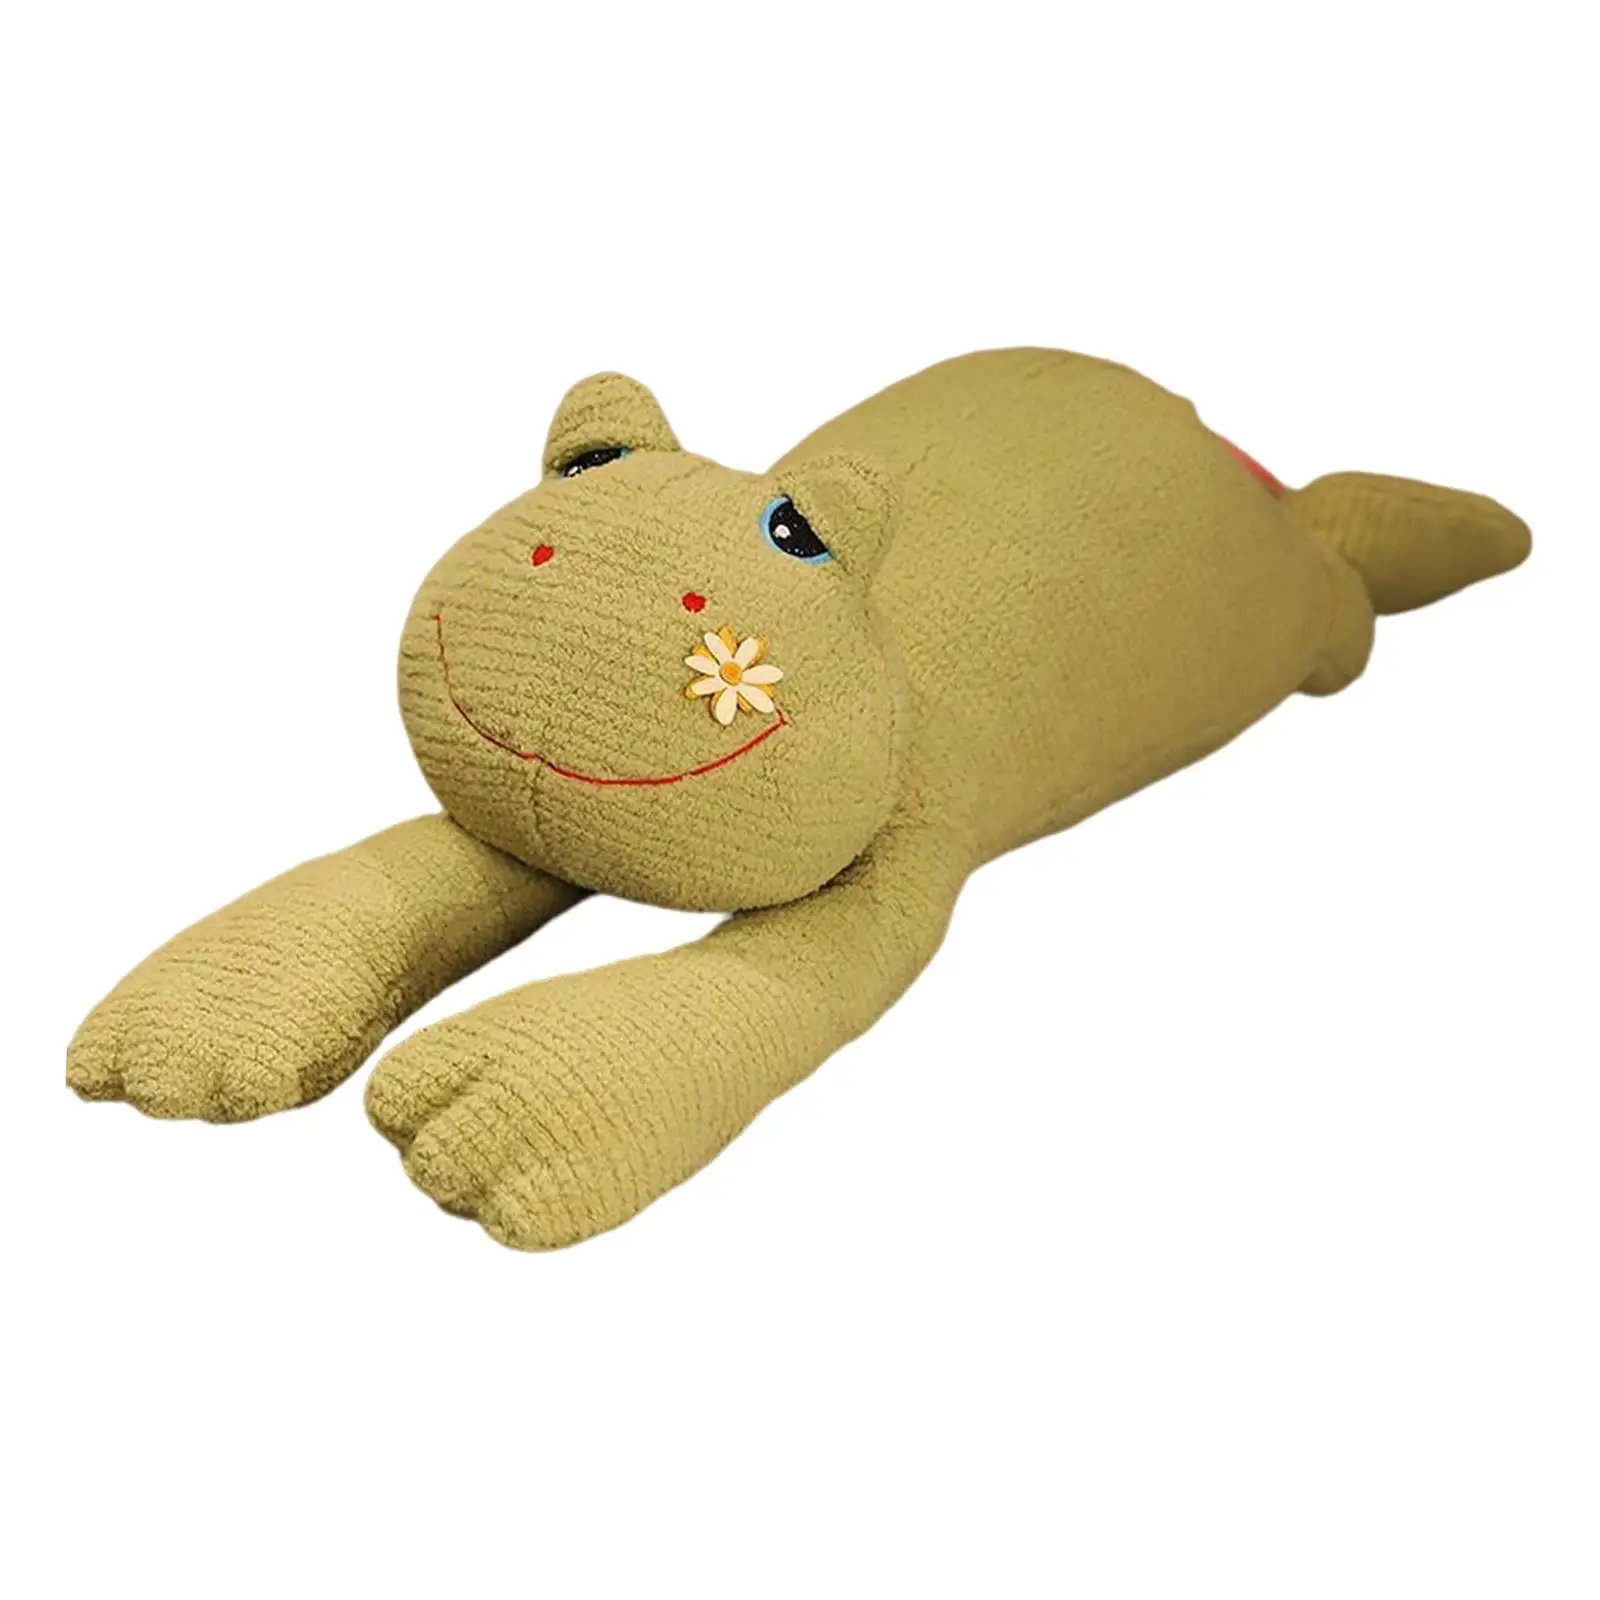 cuddly Frog Plush Toy ,pillow ,Adorable Stuffed Animal for Theme Party